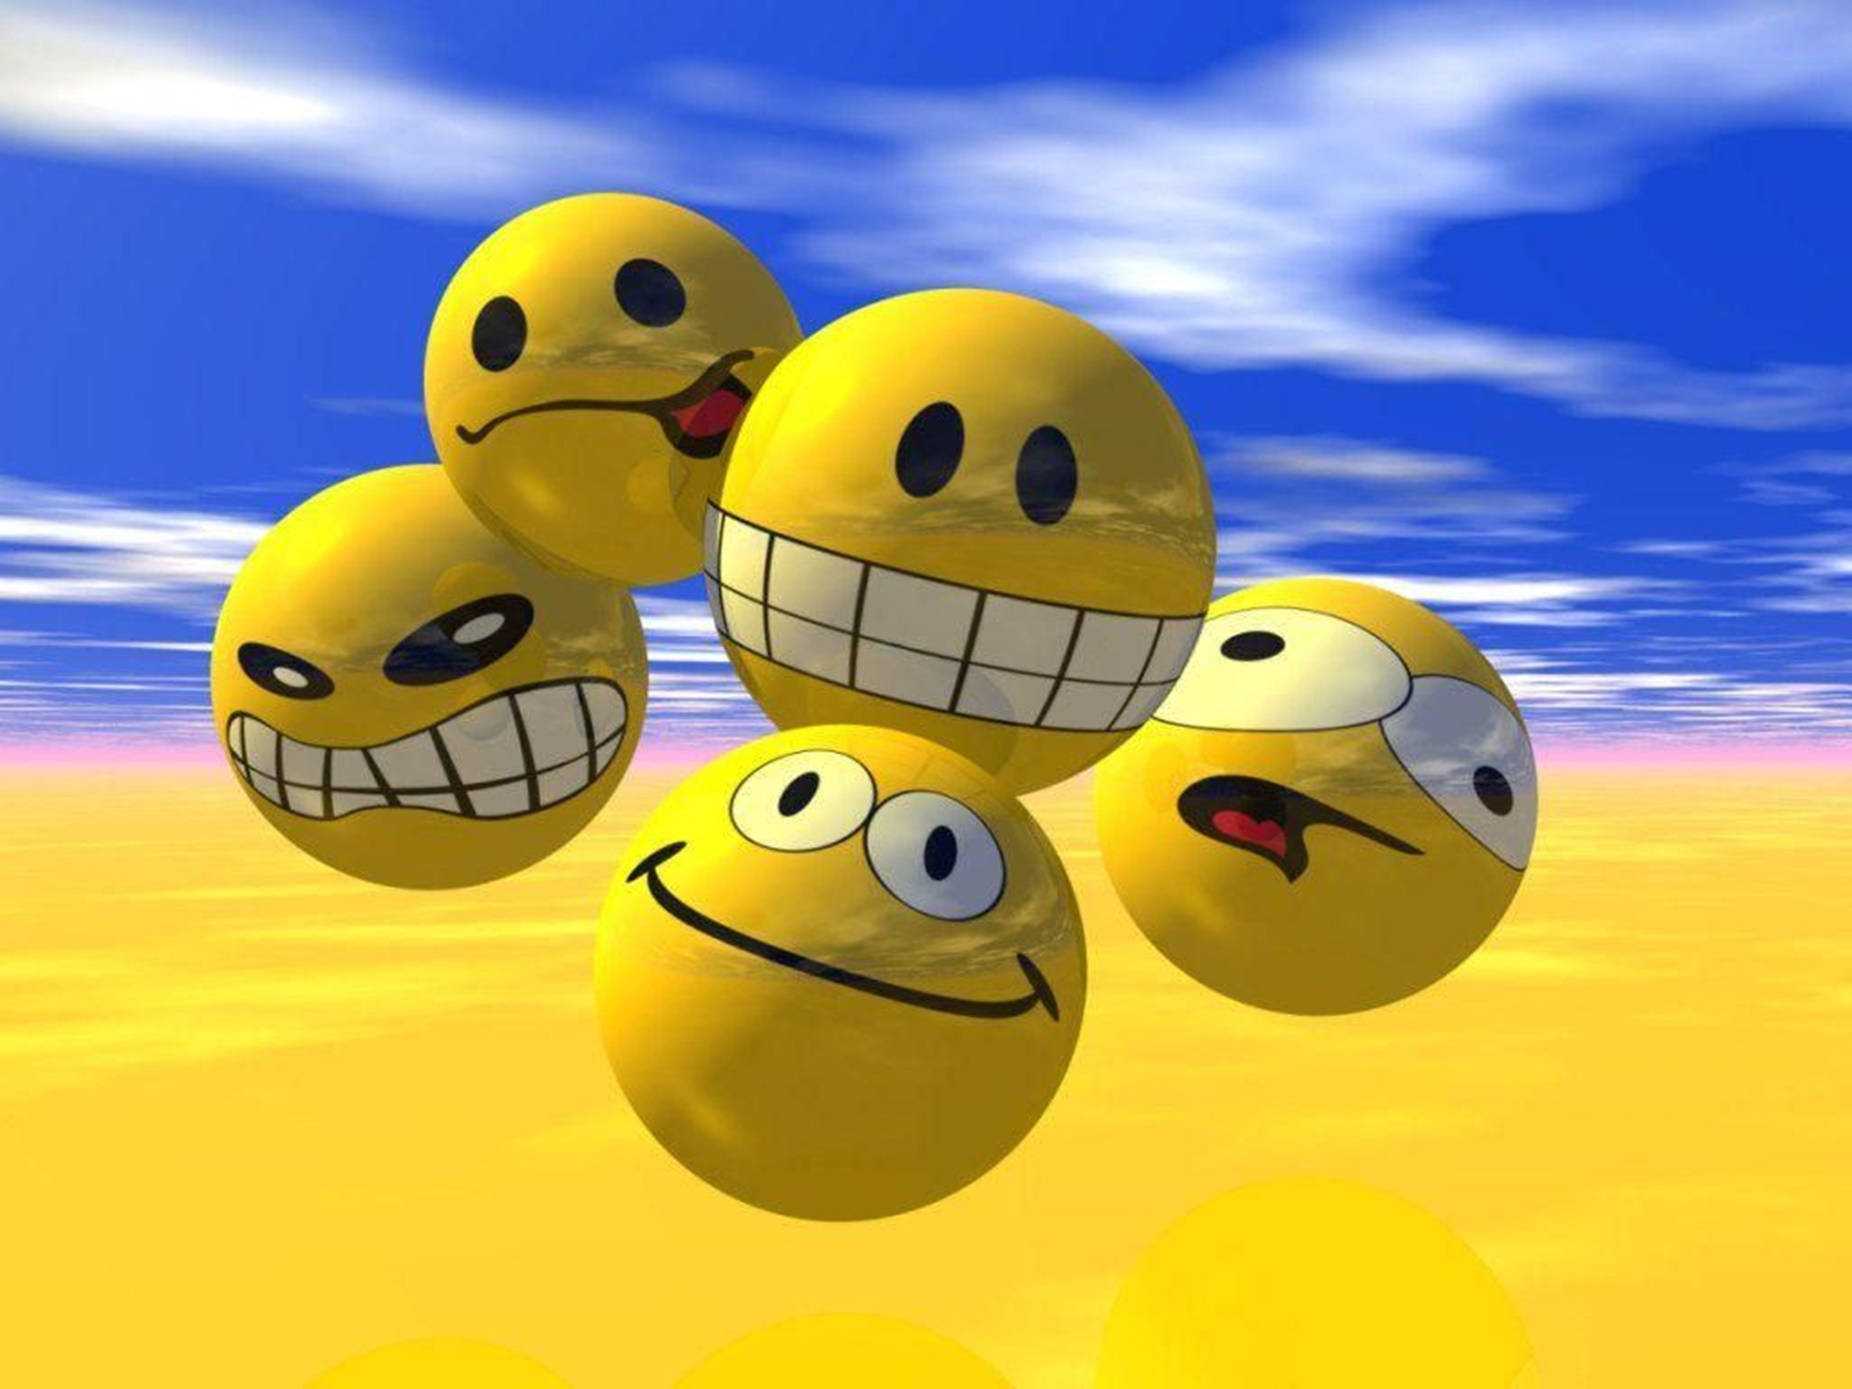 Funny Yellow Emoticons 3D Animation Wallpaper